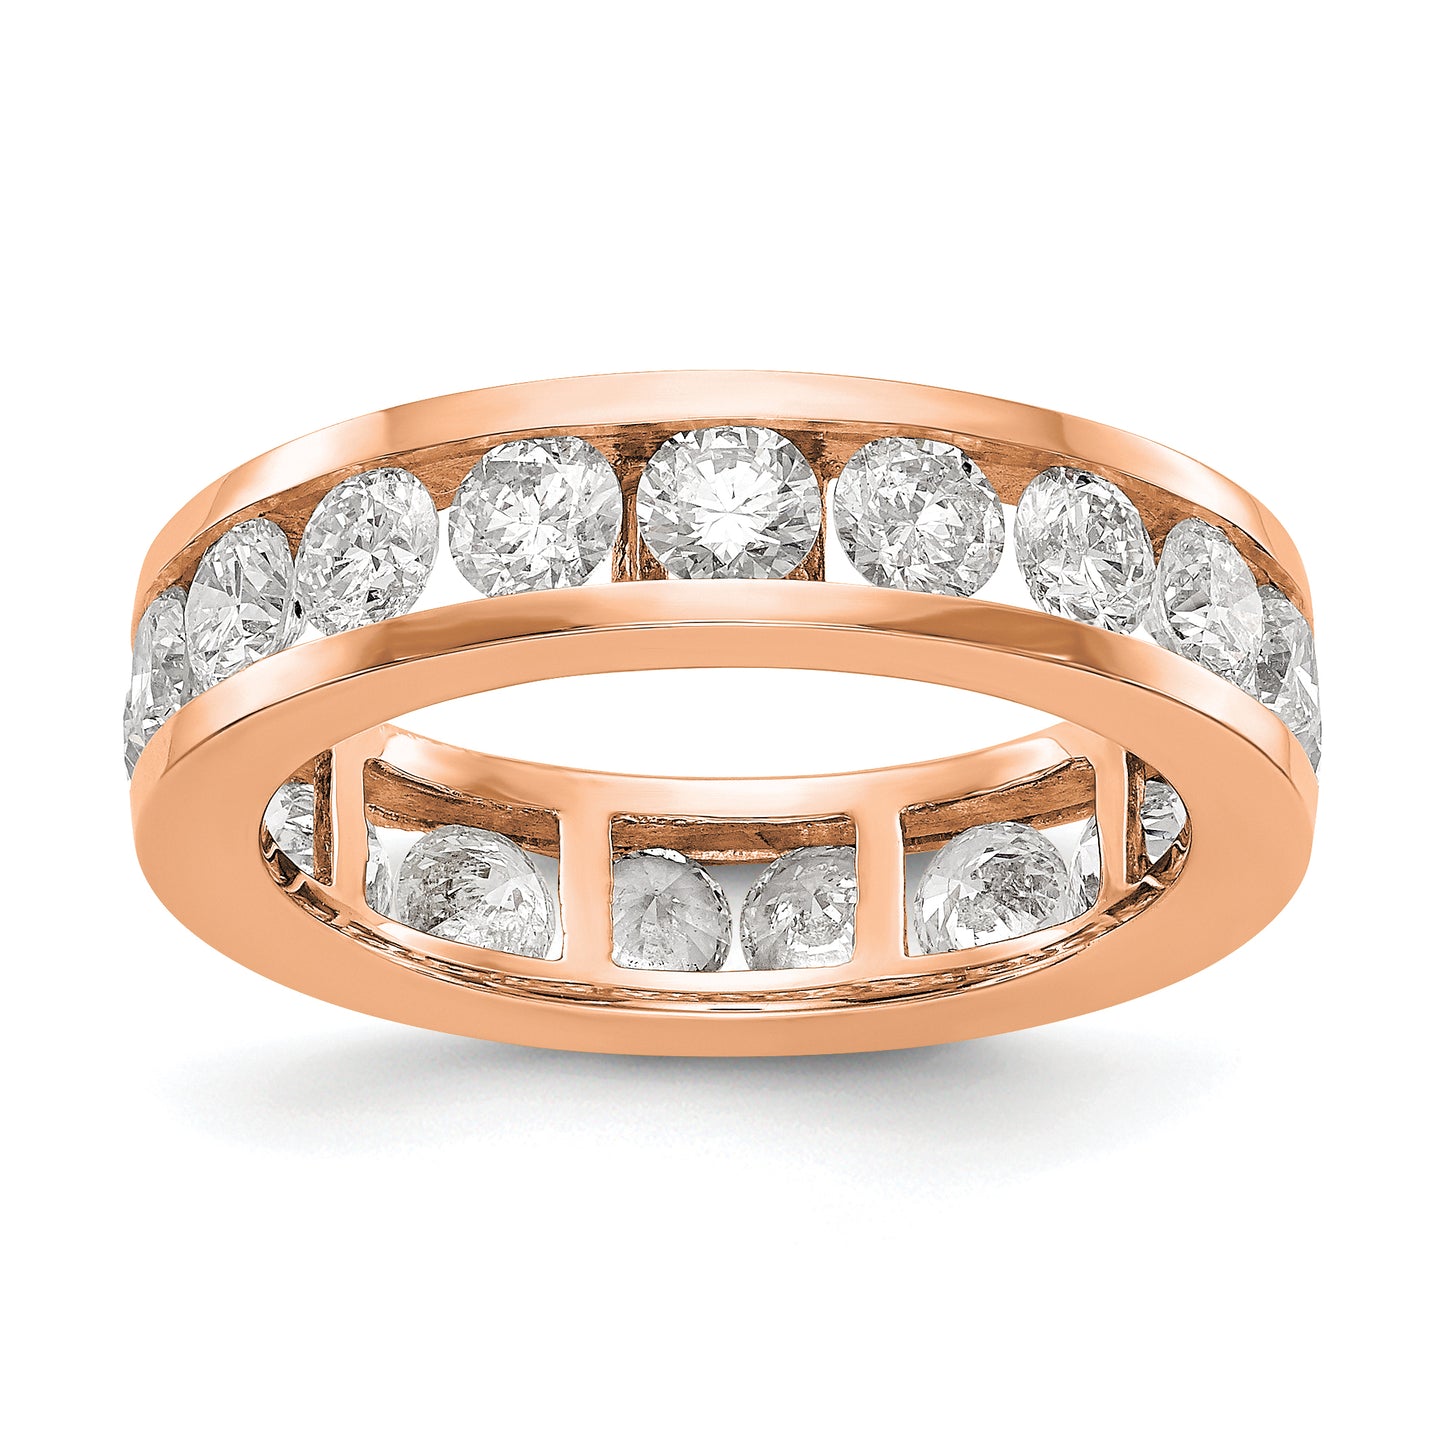 Solid Real 14k Rose Gold Polished 3ct Channel Set CZ Eternity Wedding Band Ring